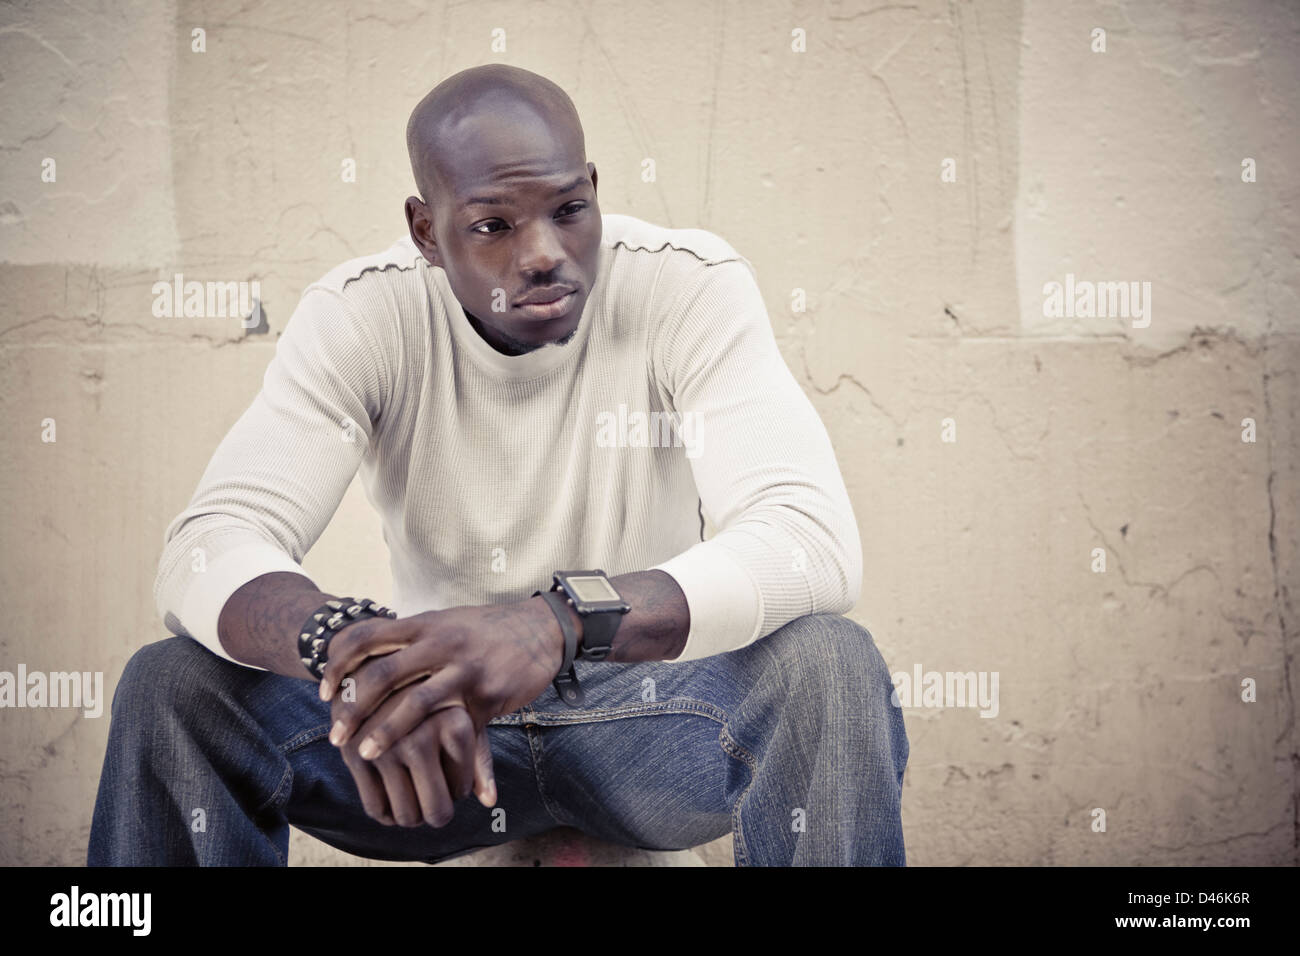 Portrait of handsome young black man with problems Stock Photo